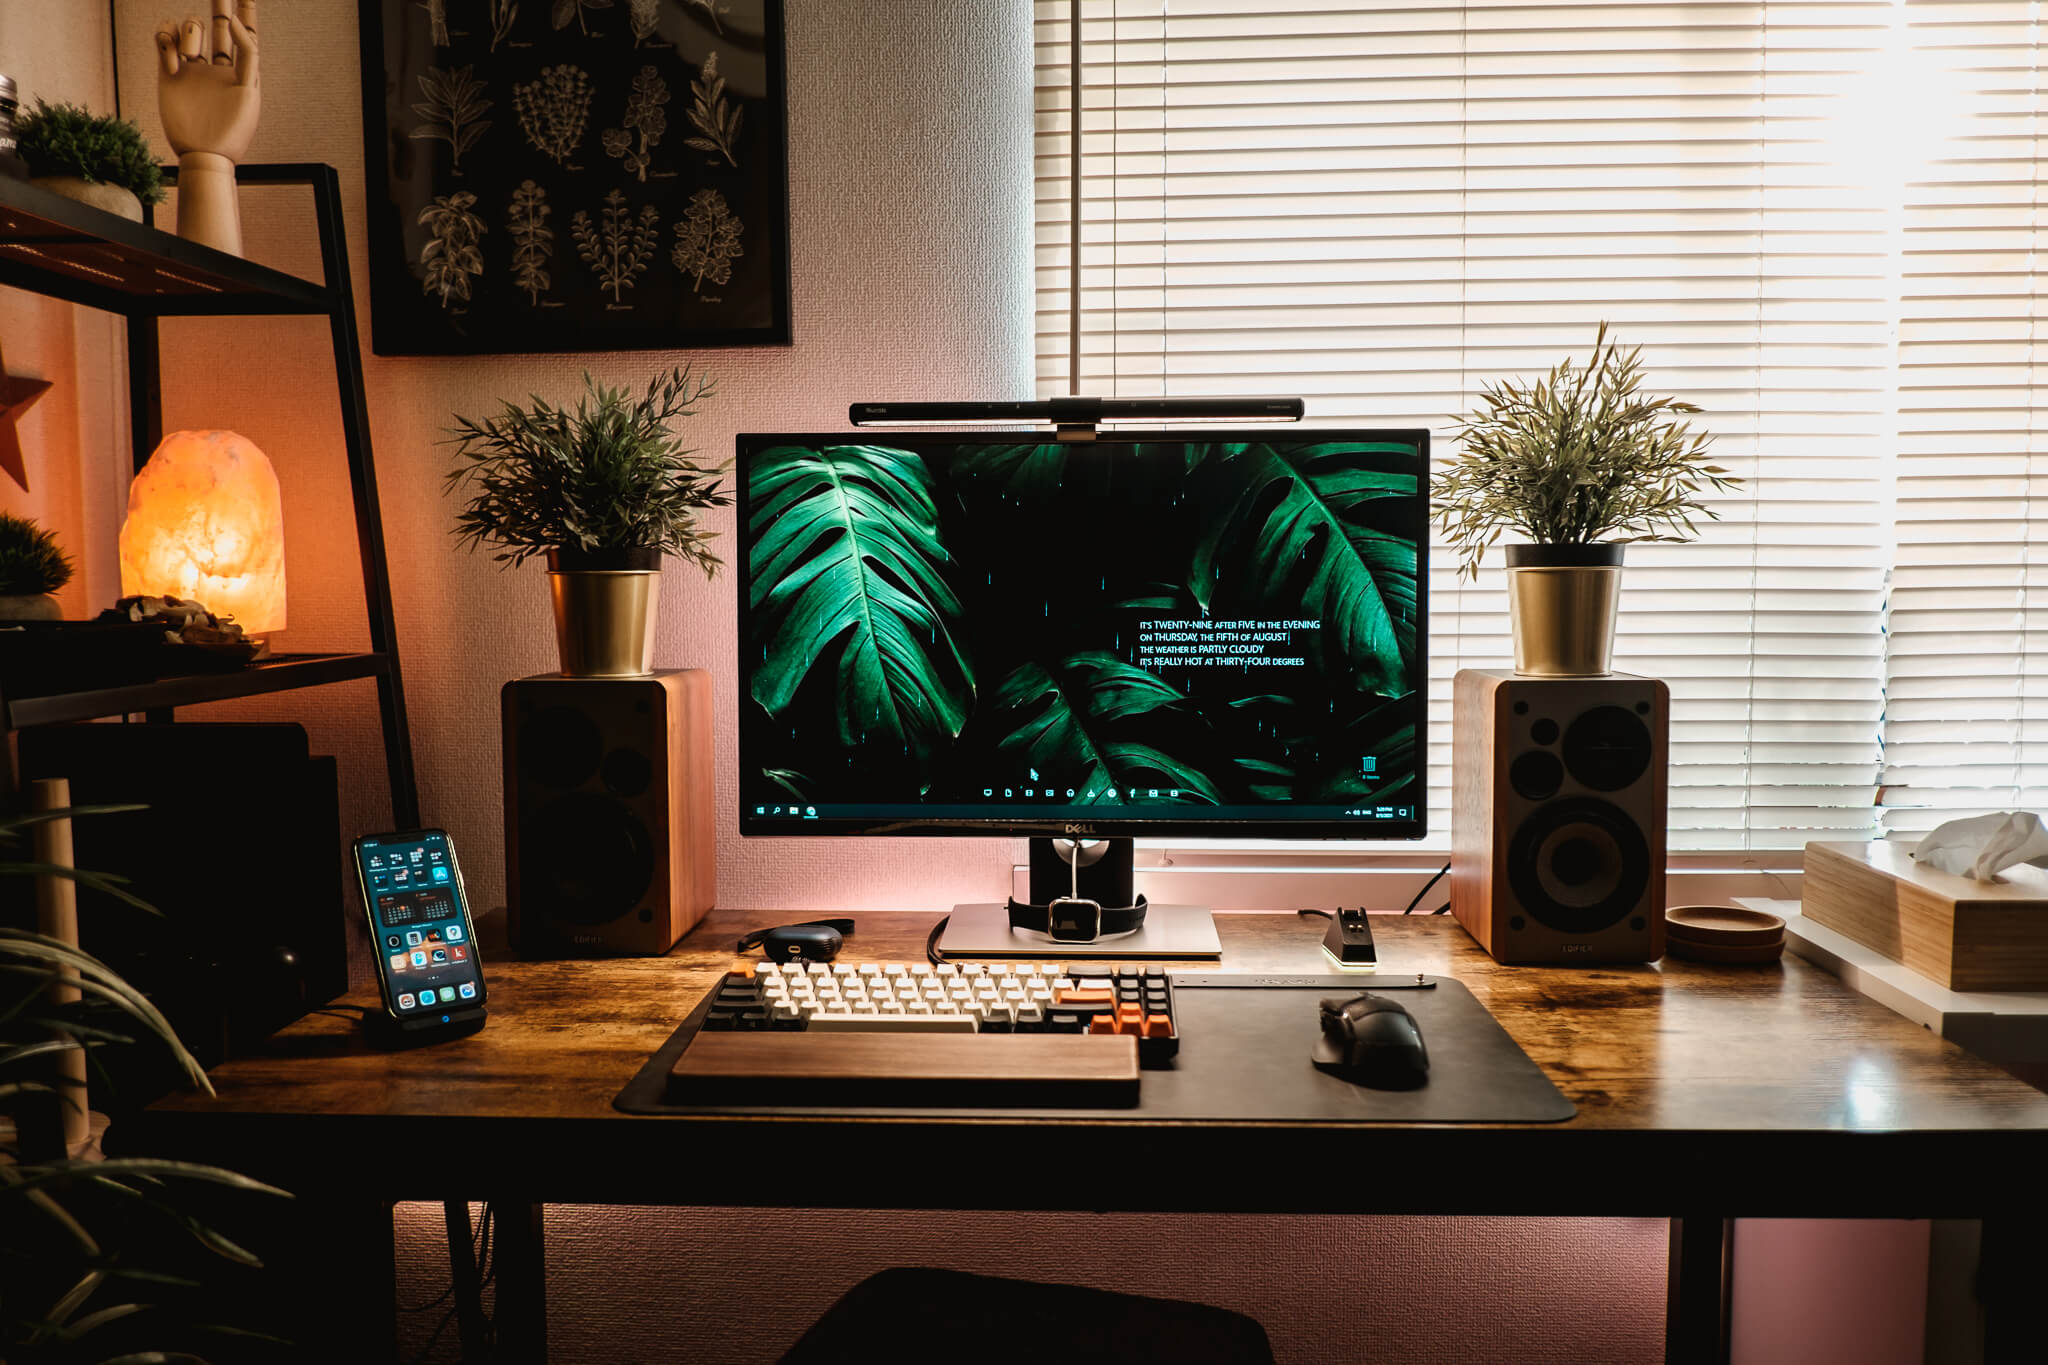 A cosy industrial dark desk setup with hints of nature